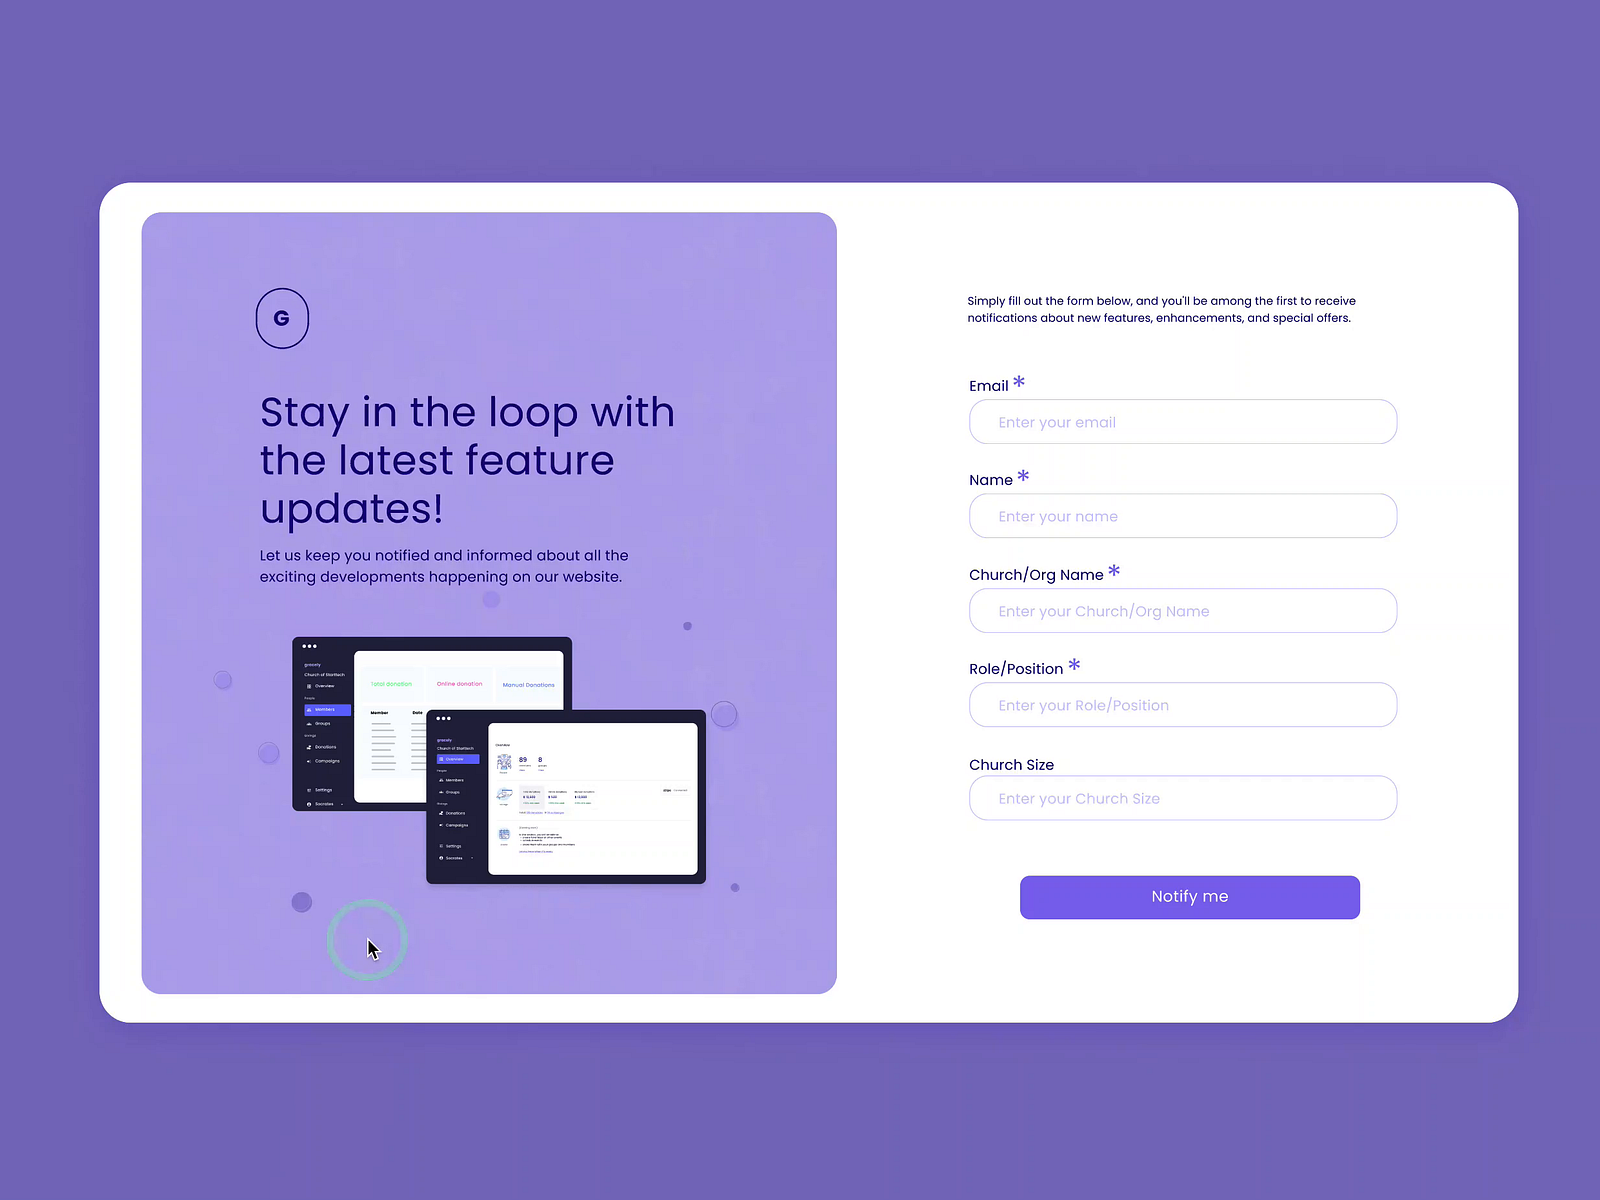 Form page by Theodora Gega on Dribbble